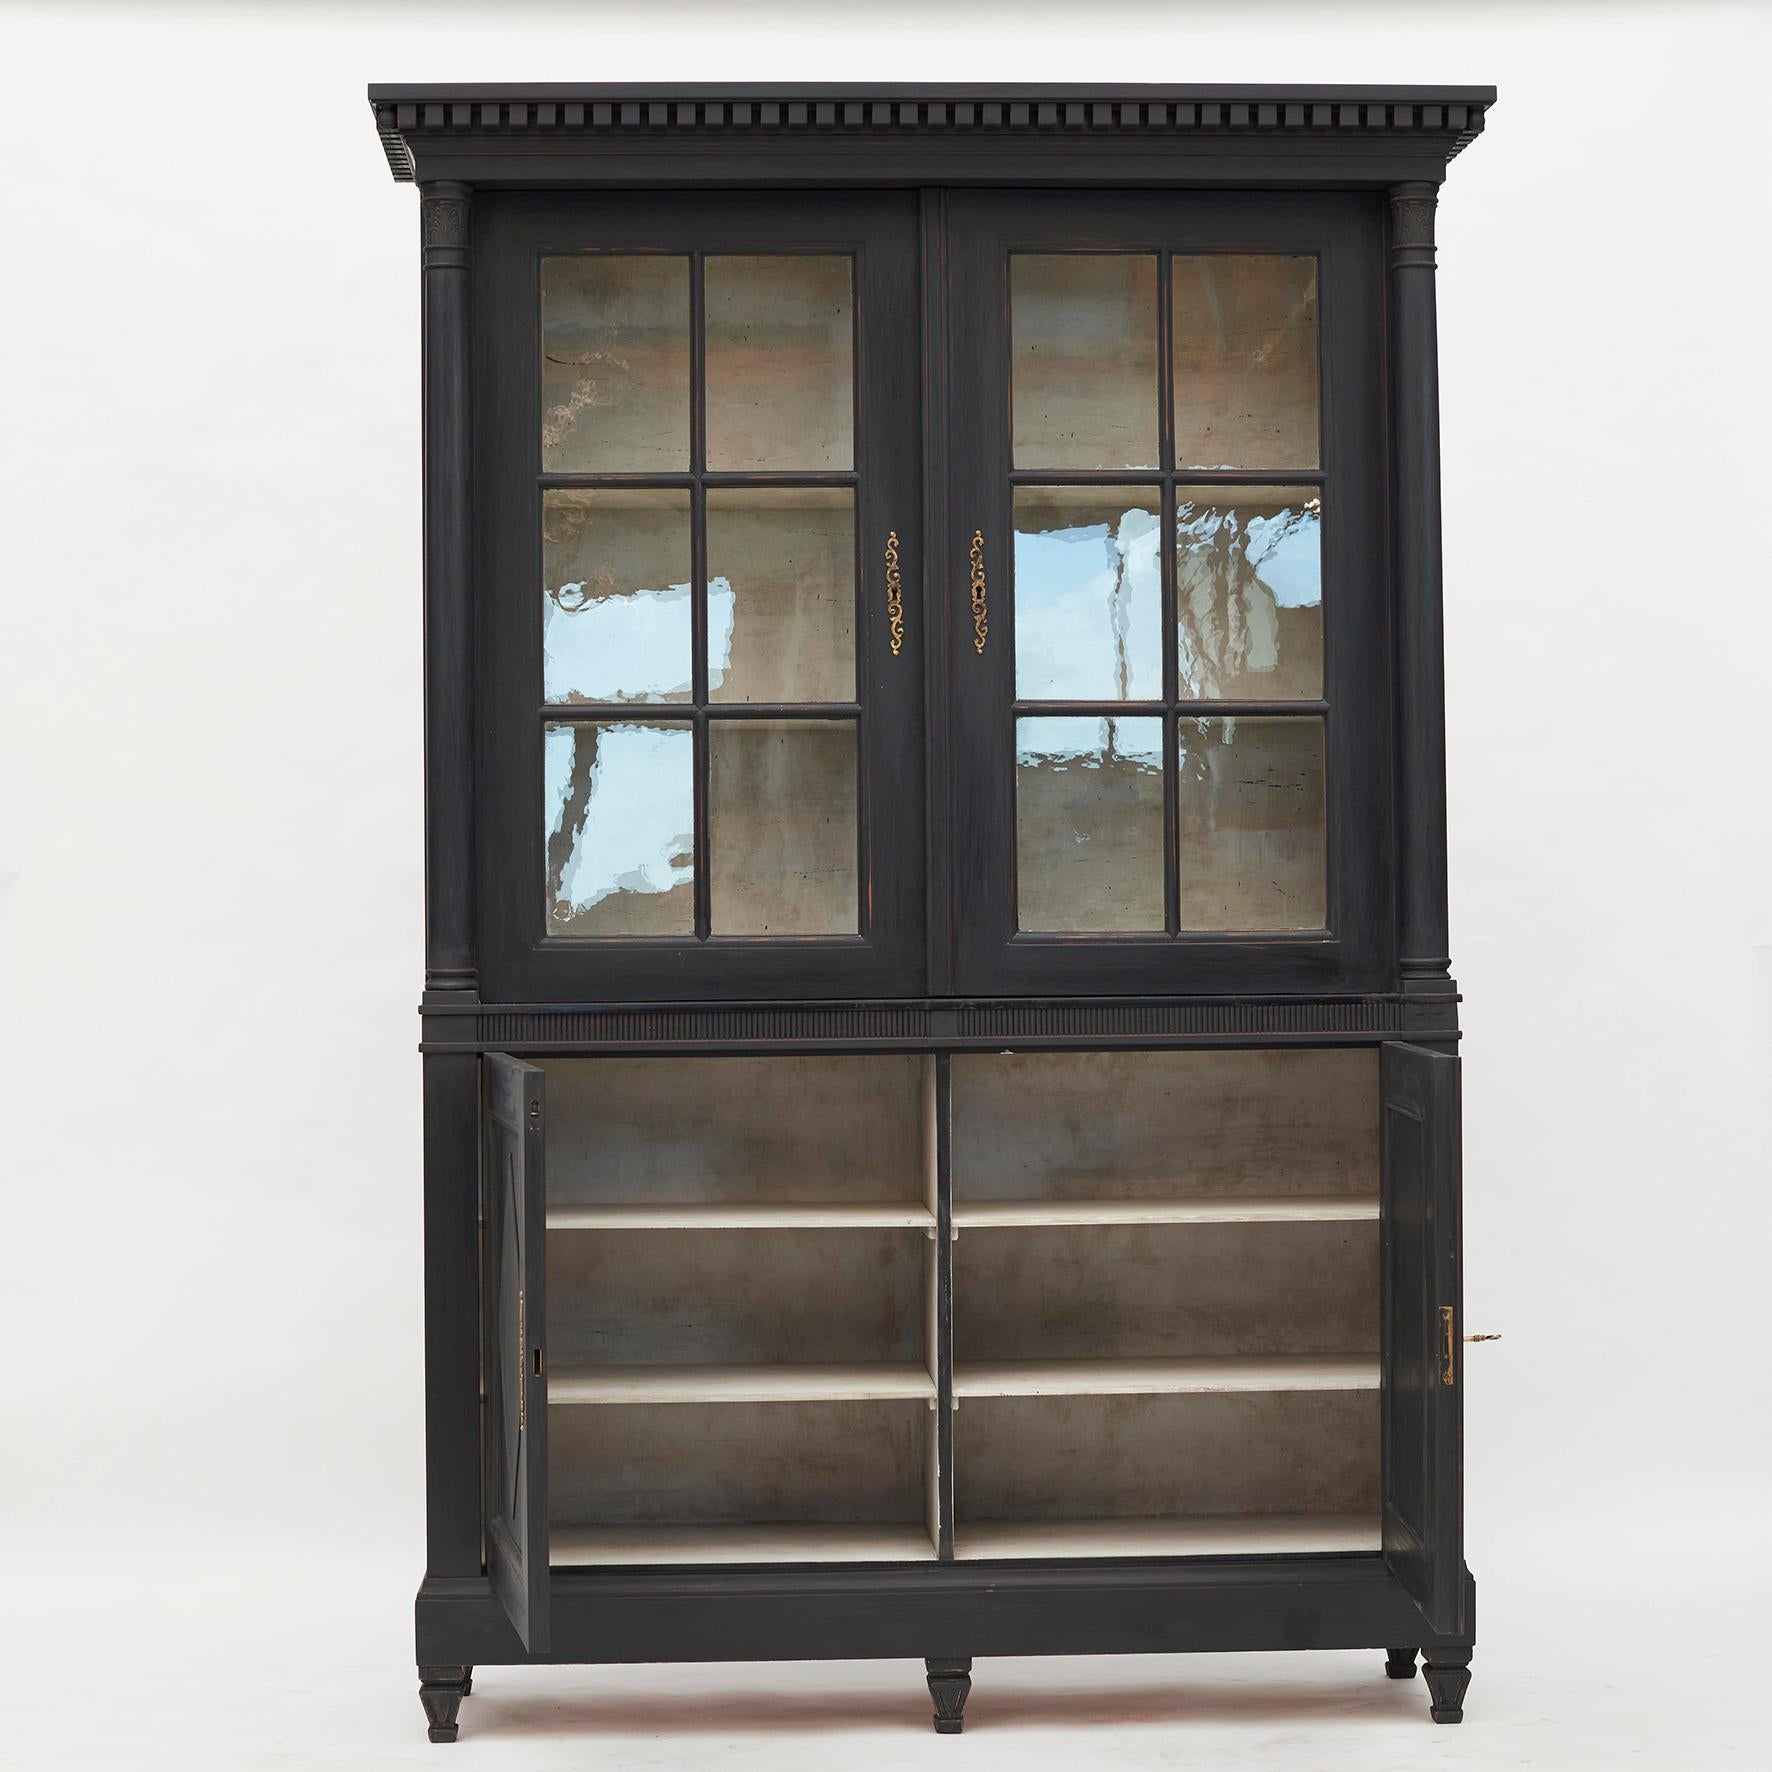 A Beautiful Gustavian 4-doors glass and wood cabinet. Pair of locking paned glass doors sitting atop pair of locking wood doors with rhombus motif fillings. Black painted wood with light grey color inside. Brass fittings, 1 key. Gustavian style,